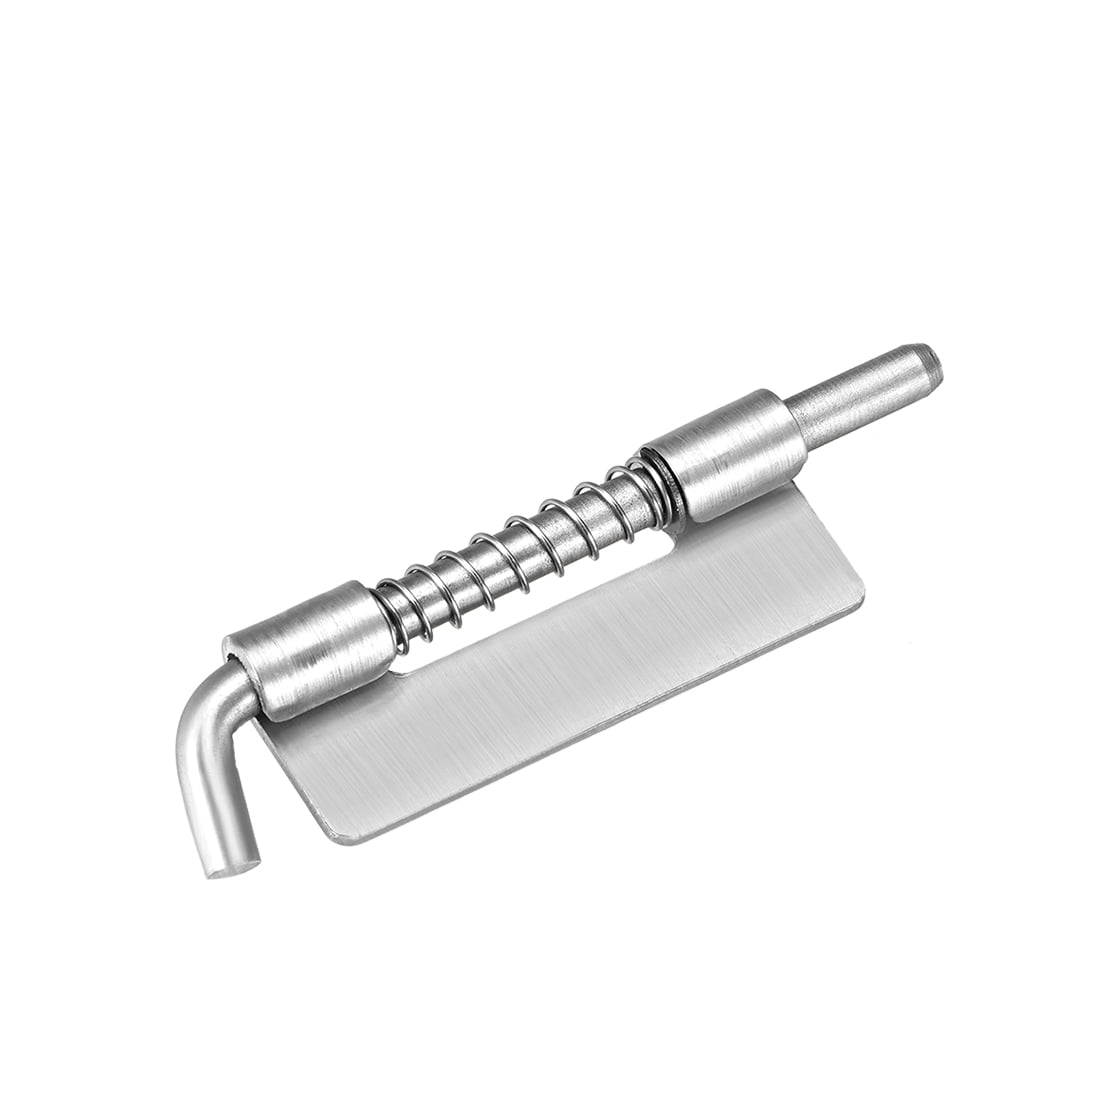 Stainless Steel Highly Polished Spring Closing Latch, 2 x Barrel Bolt